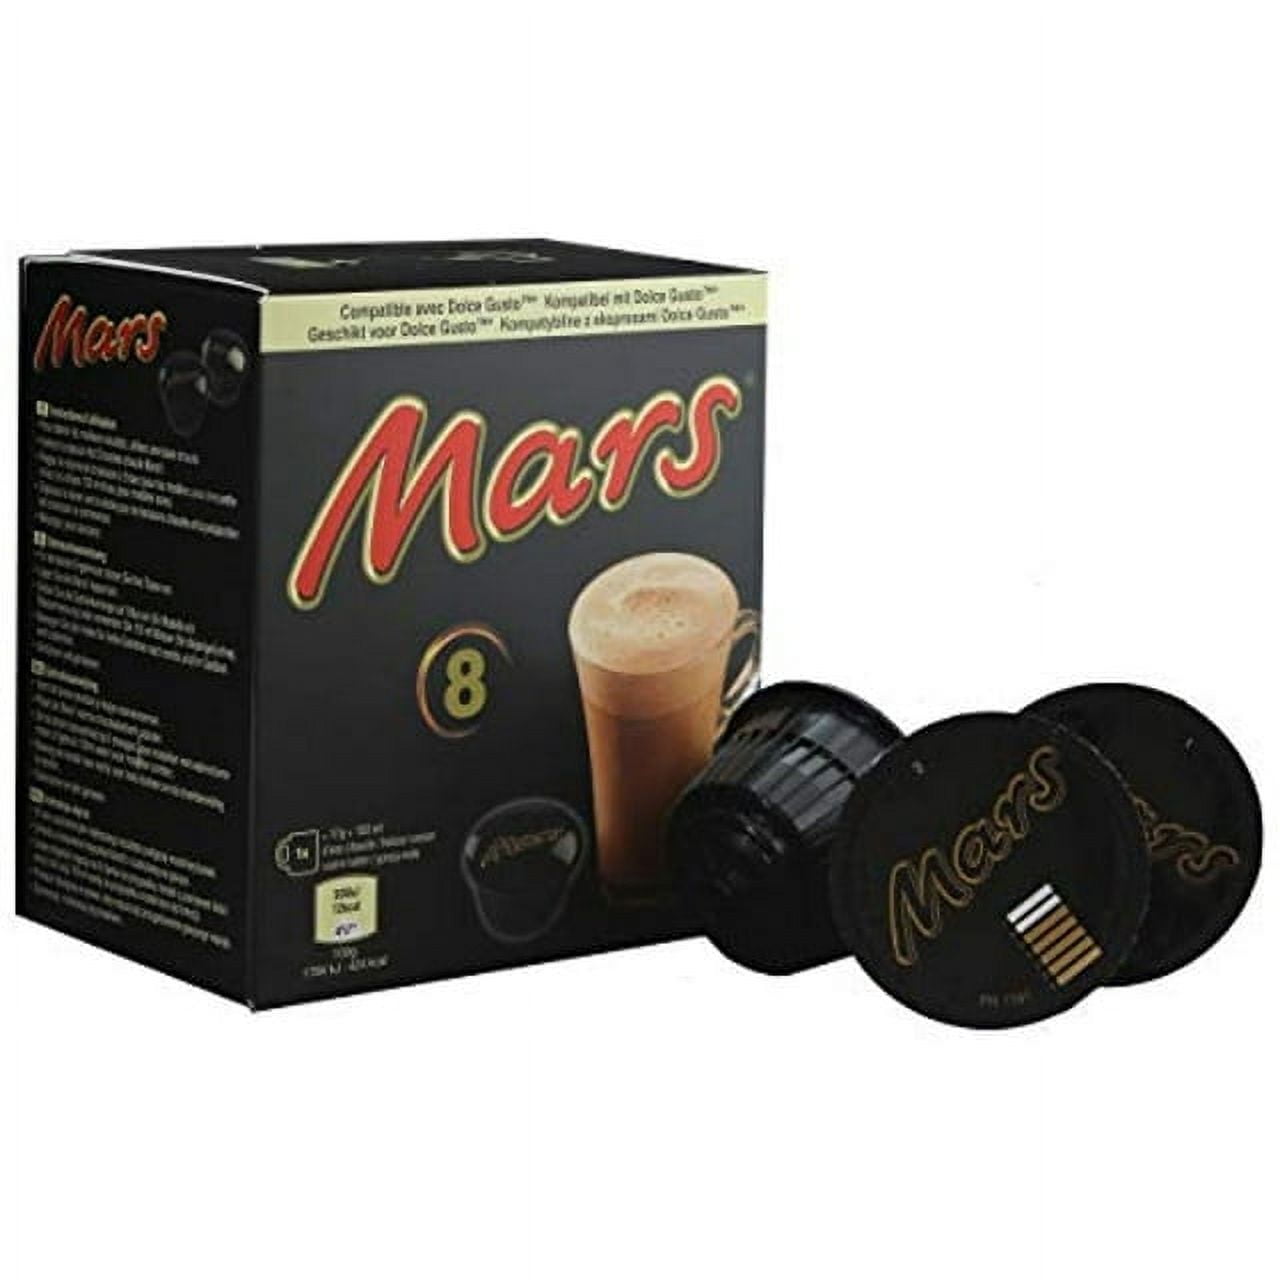 Dolce Gusto Compatible Capsules, Mars Flavored Hot Chocolate, 8 X 17 G (0.5  Oz)